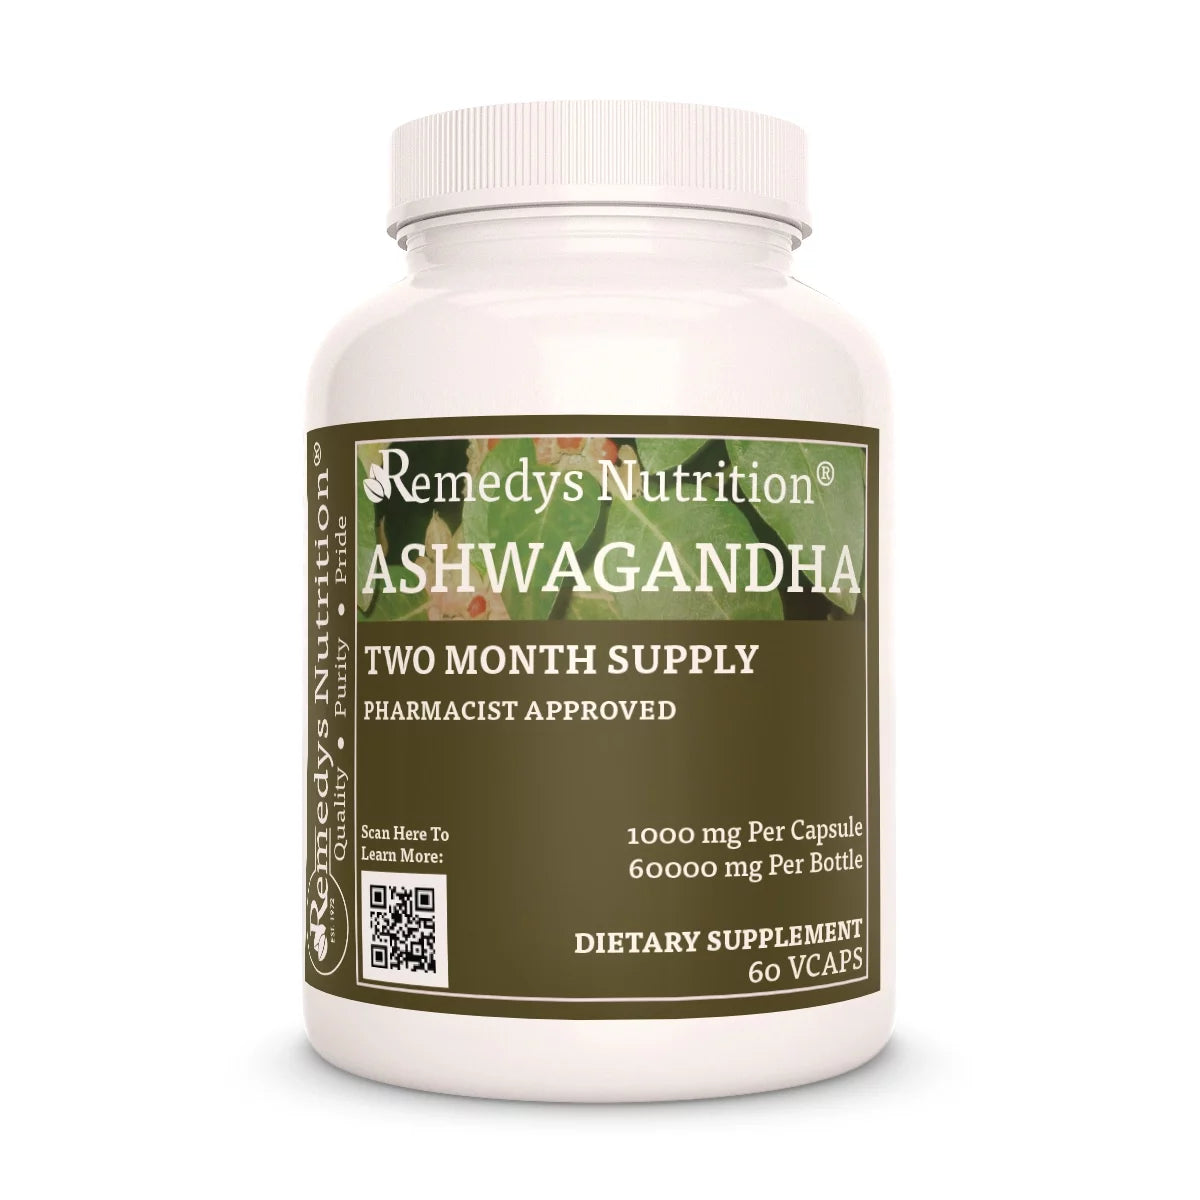 Image of Remedy's Nutrition® Ashwagandha Capsules Dietary Herbal Supplement front bottle. Made in the USA. Withania somnifera